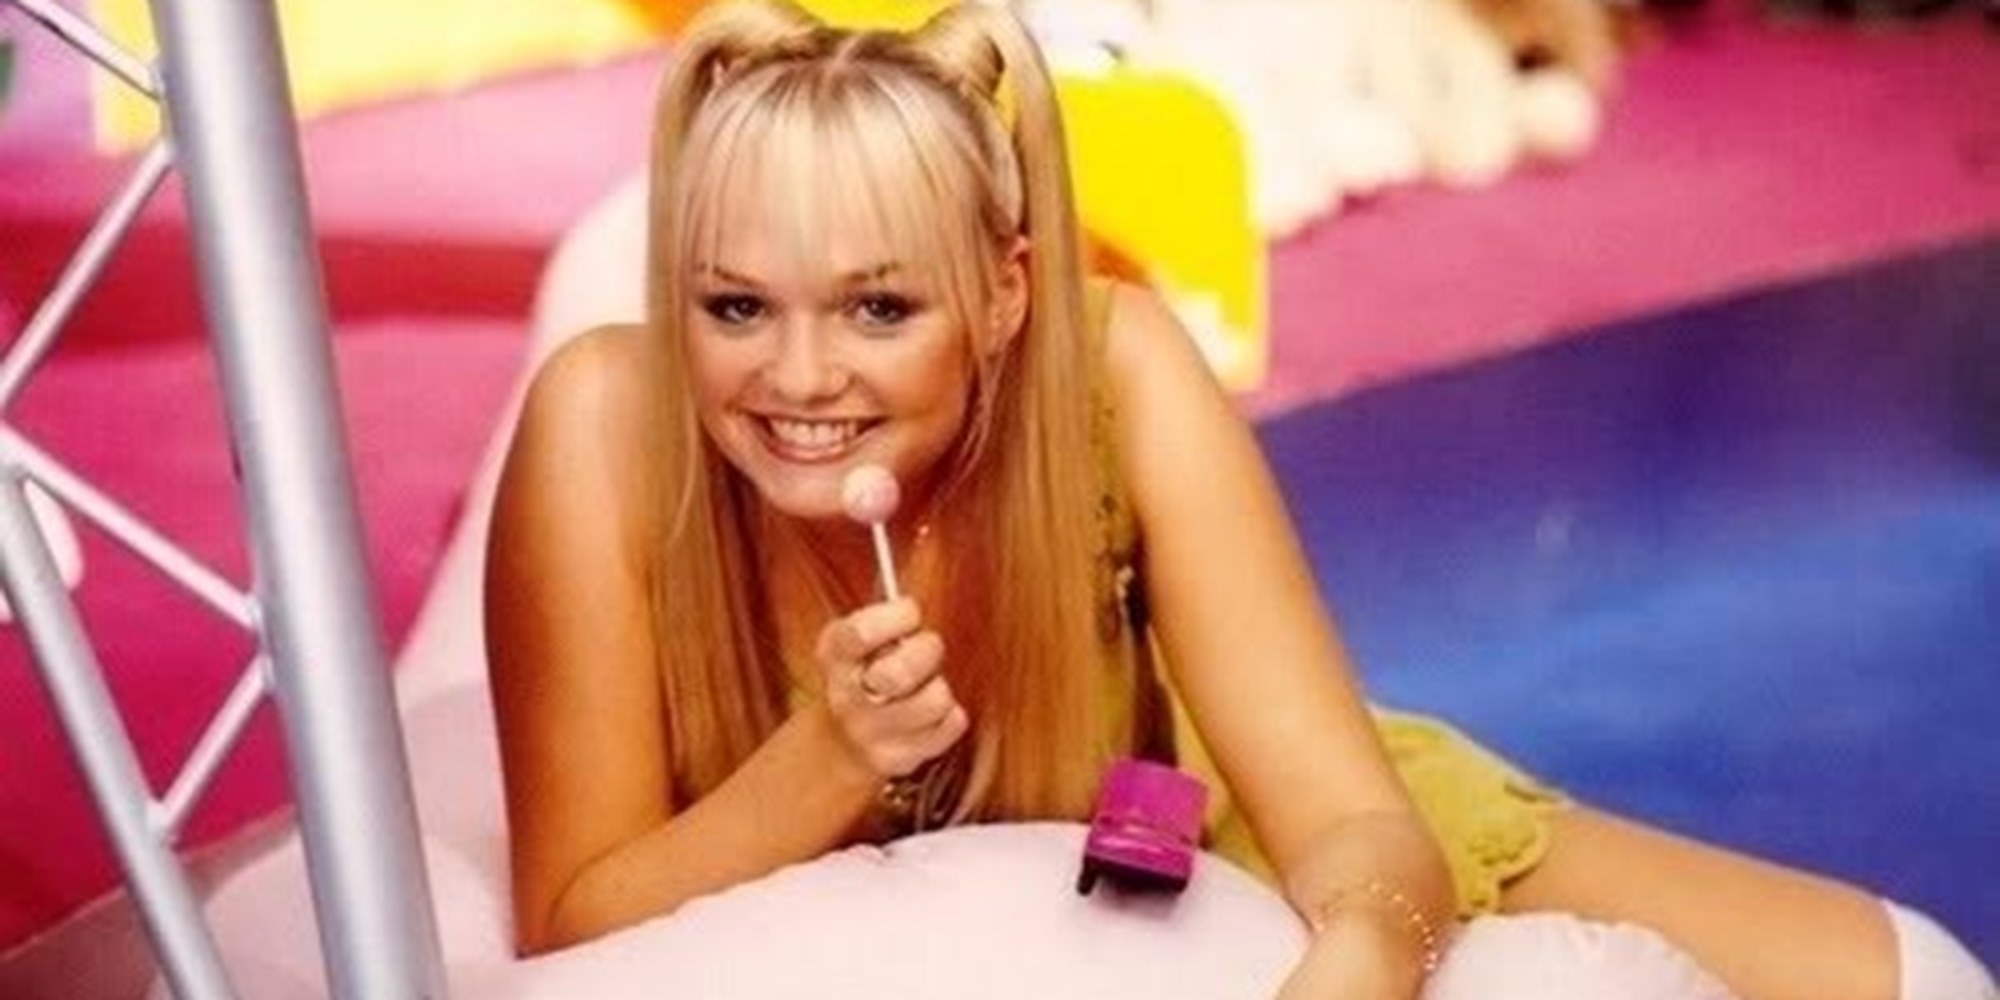 7 Things You Probably Didn't Know About Baby Spice.